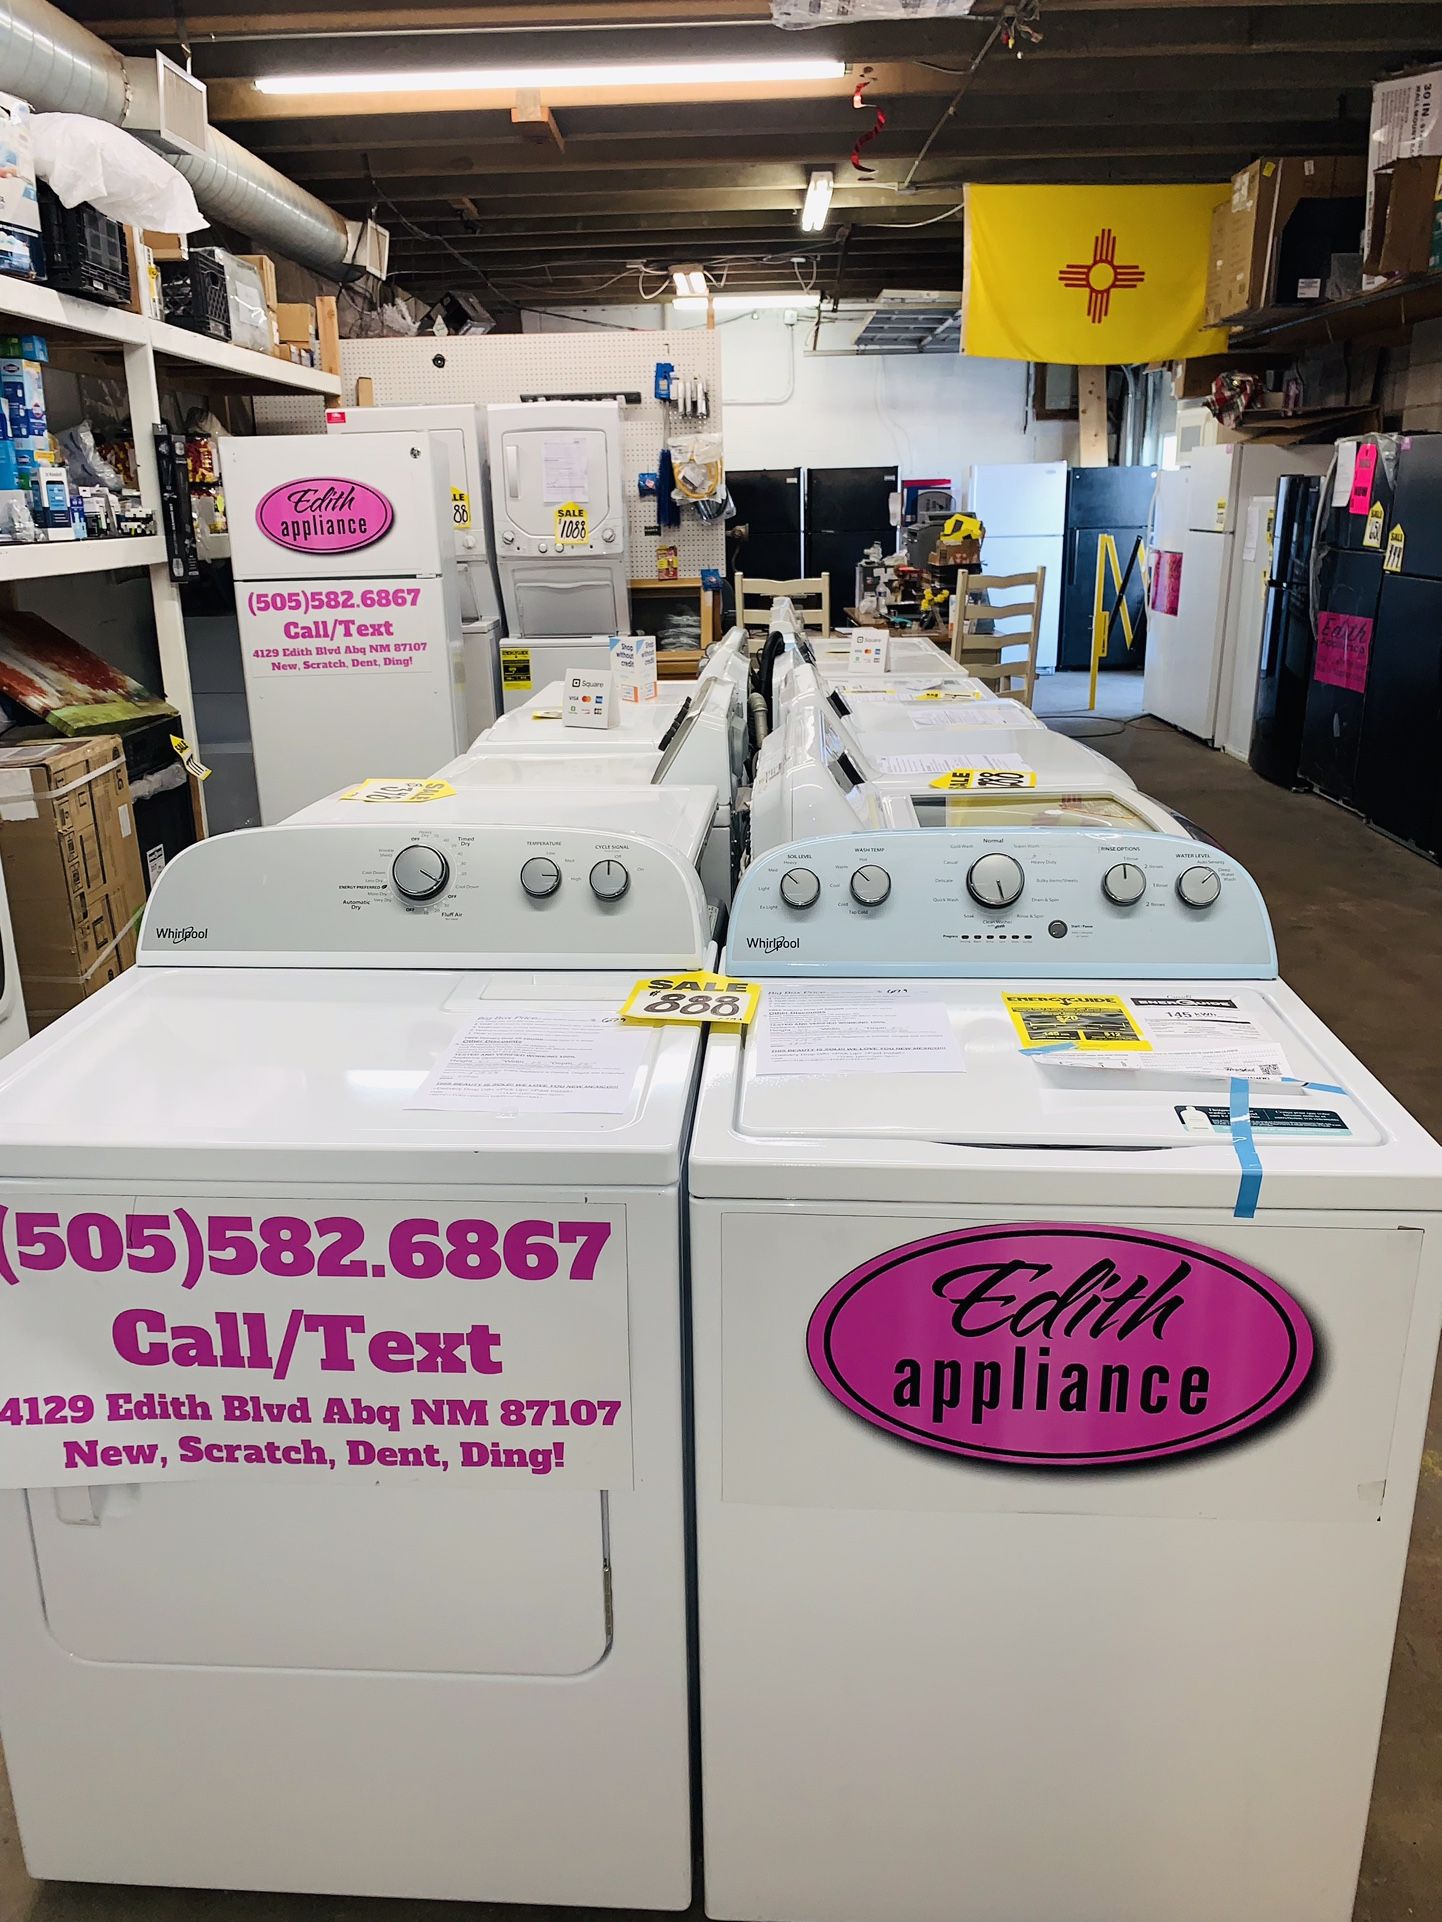 New Whirlpool Washer And Electric Dryer 